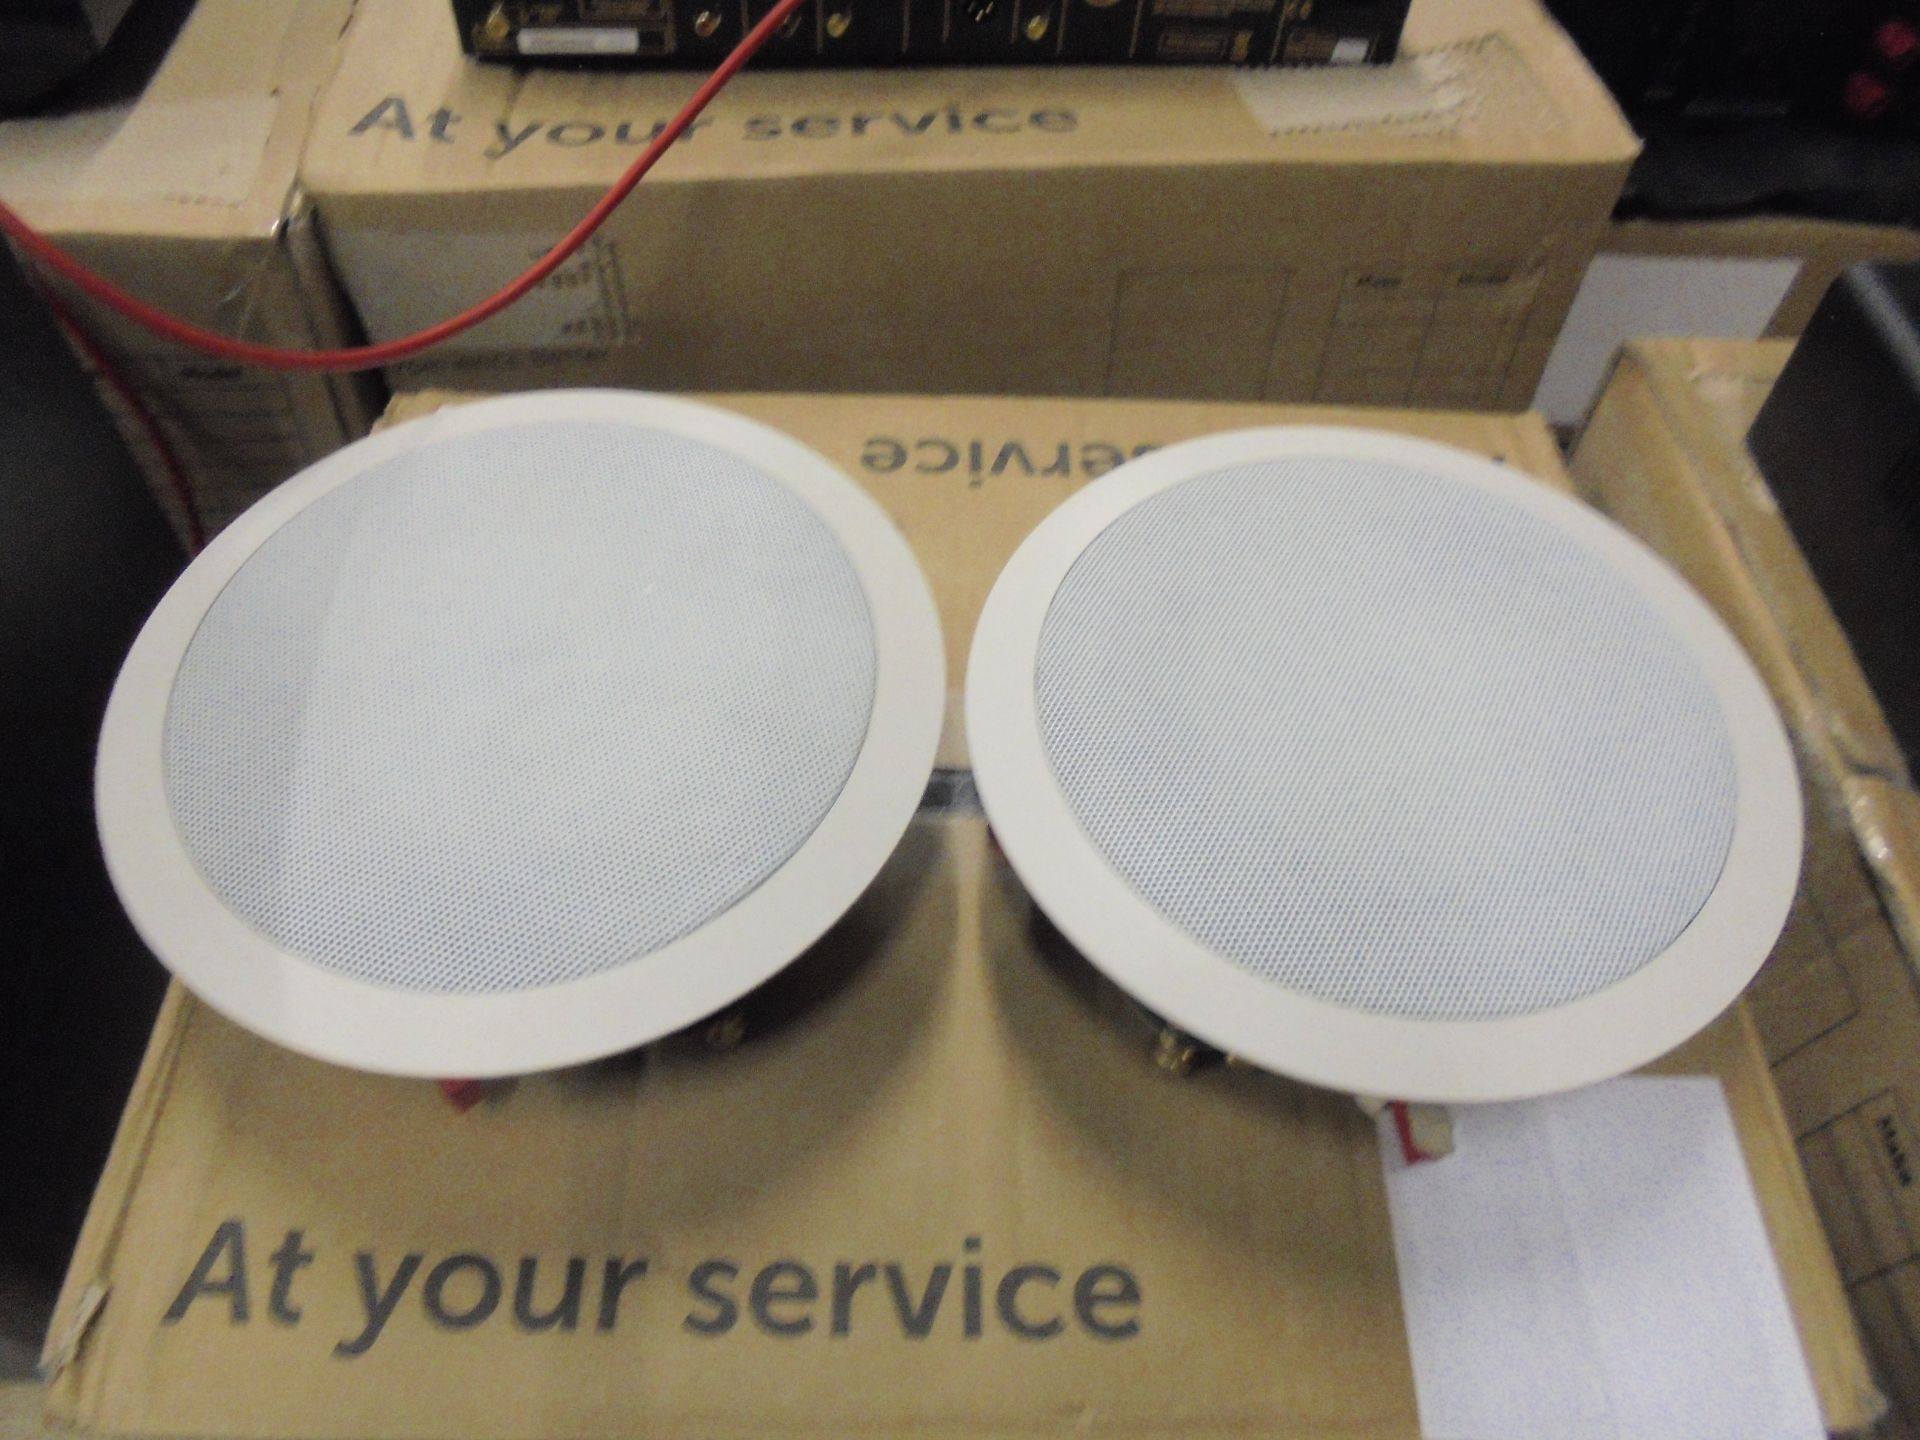 Cambridge Audio SS10/C155 pair of ceiling speakers, tested working and boxed. RRP £149.95